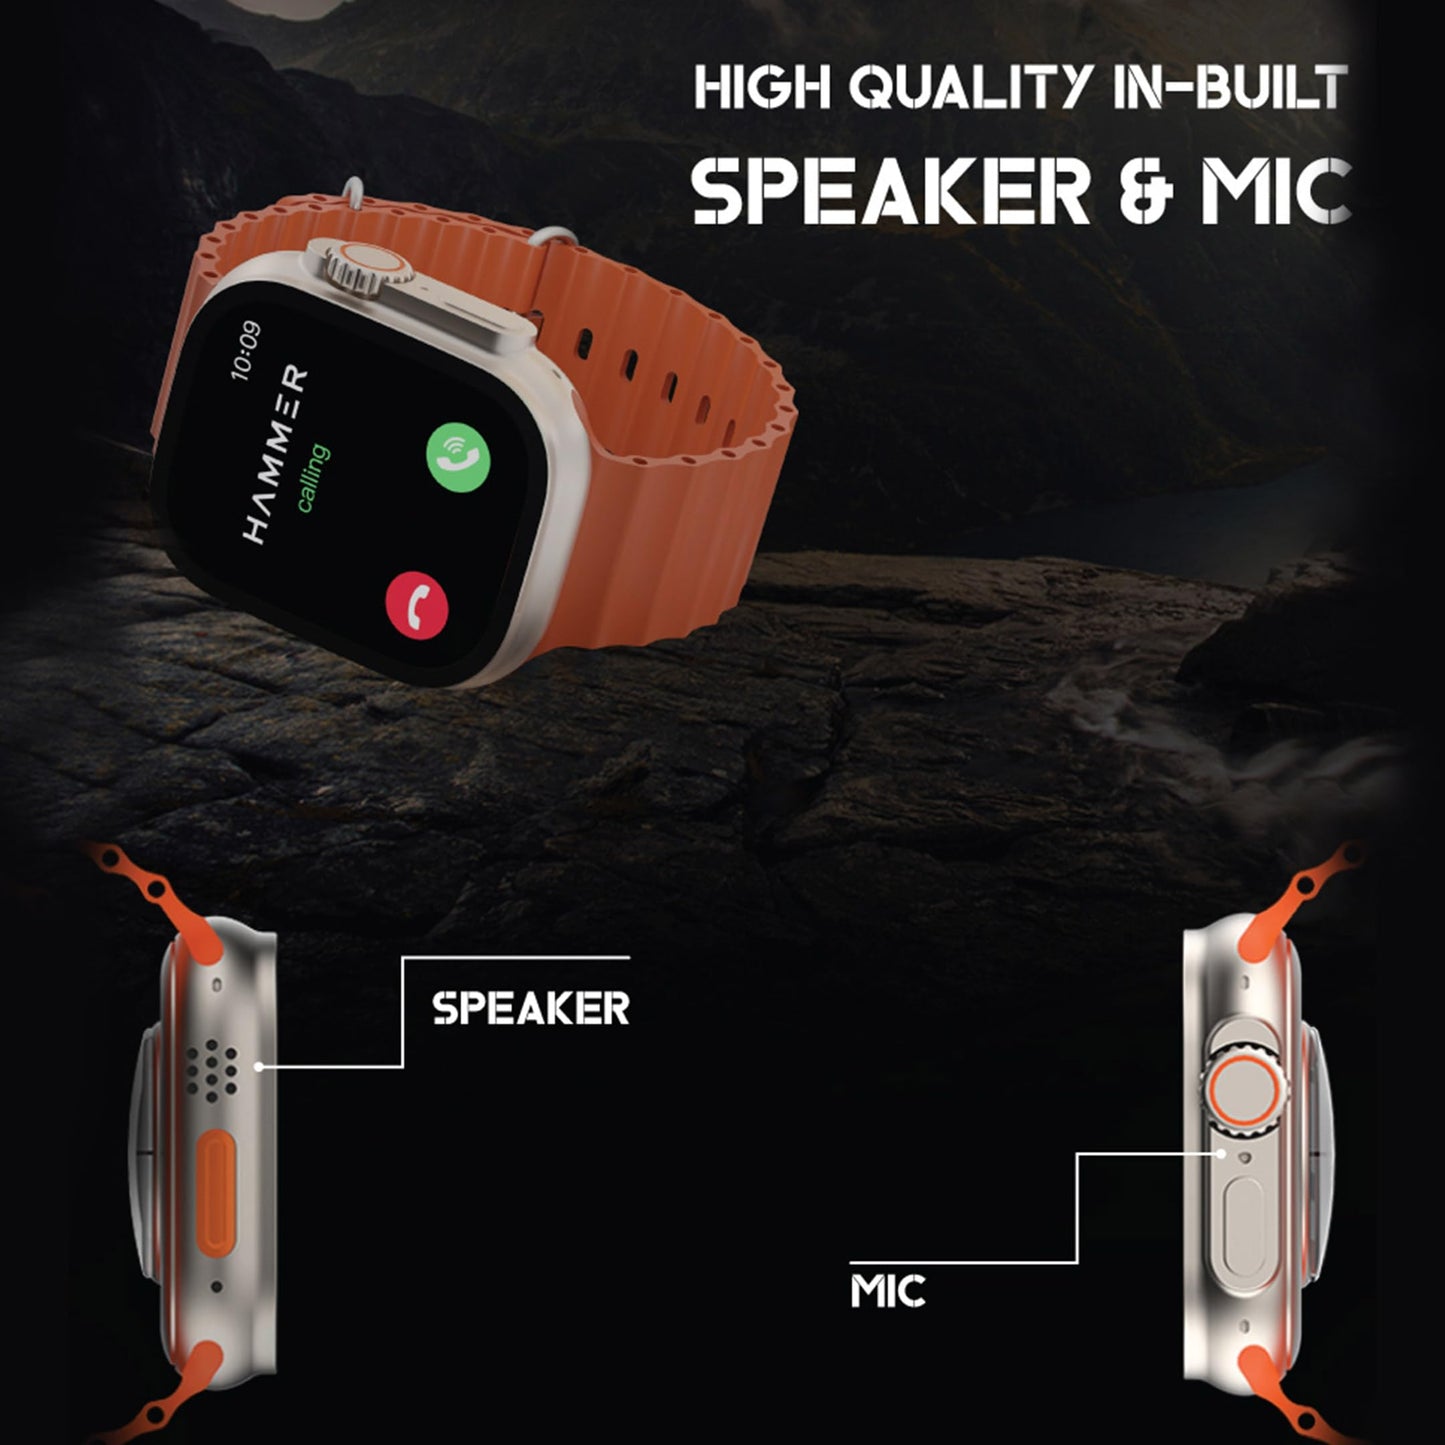 HAMMER Active 2.0 Ultra 1.95" Display Bluetooth Calling Smart Watch with Metal Body, in-Bulit Games, Wireless Charging, AOD, 600 NITS Brightness (Orange)